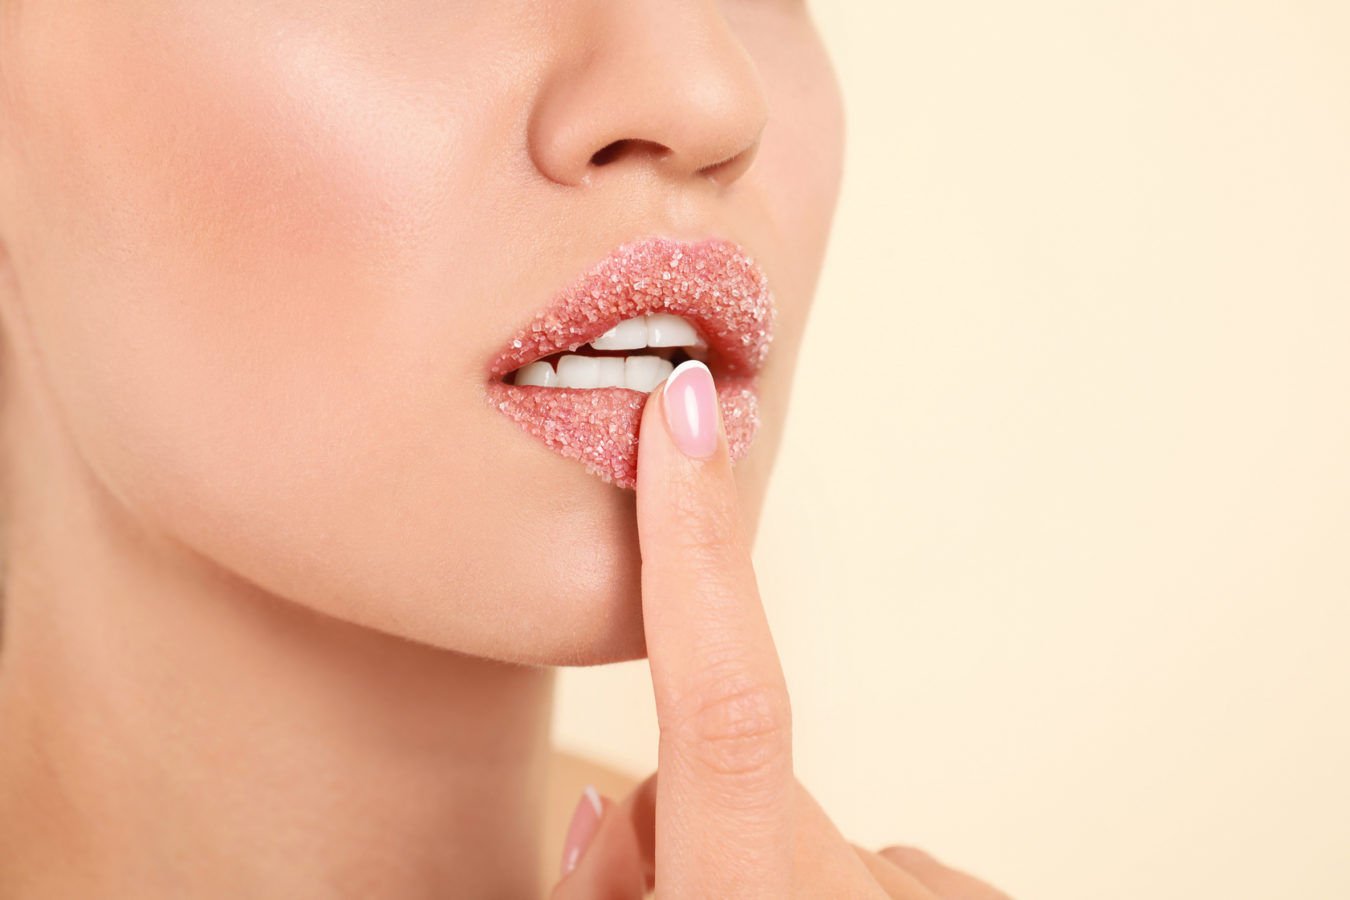 Kiss chapped lips goodbye with these best lip scrubs